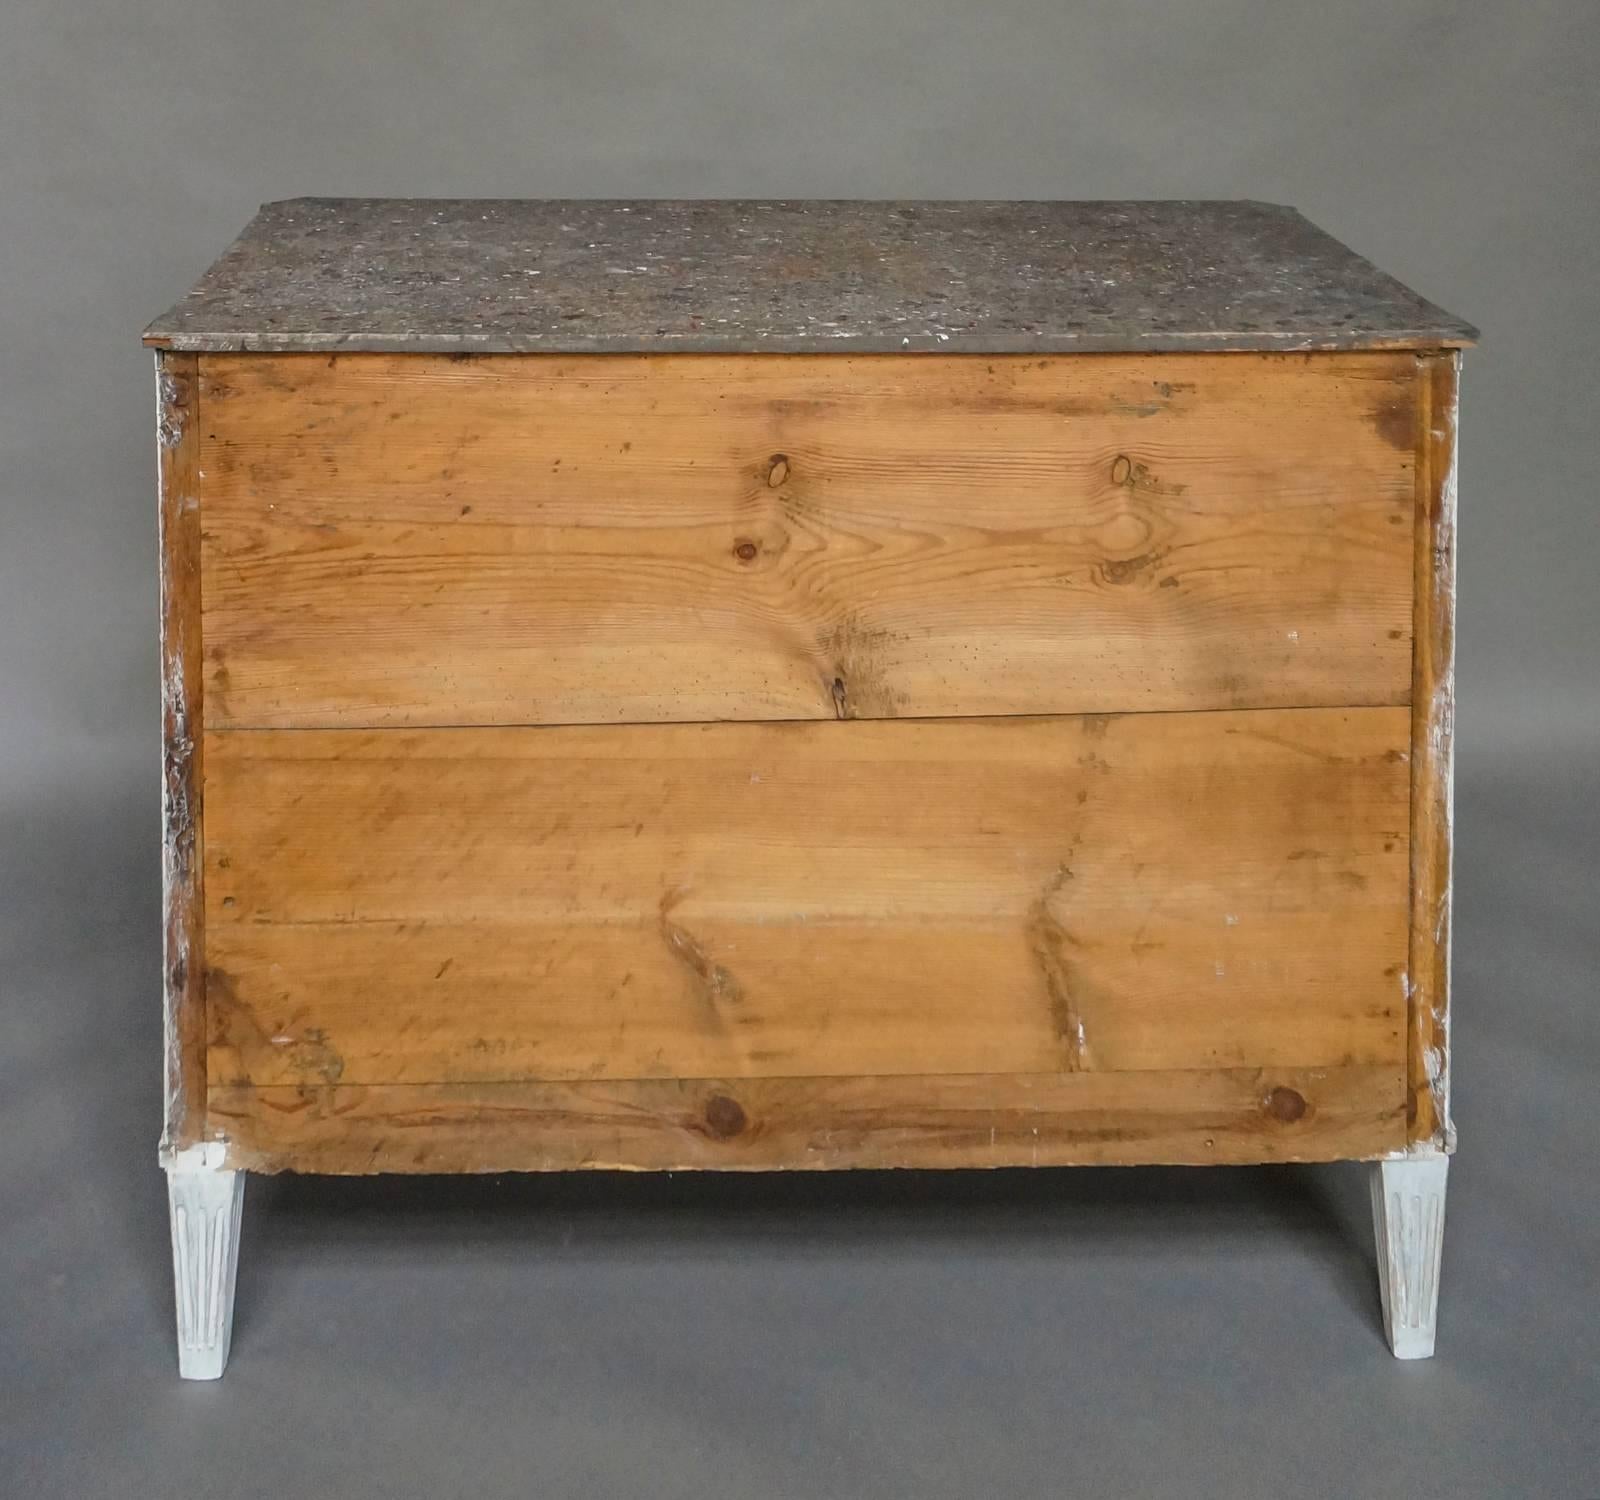 18th Century Period Gustavian Chest of Drawers